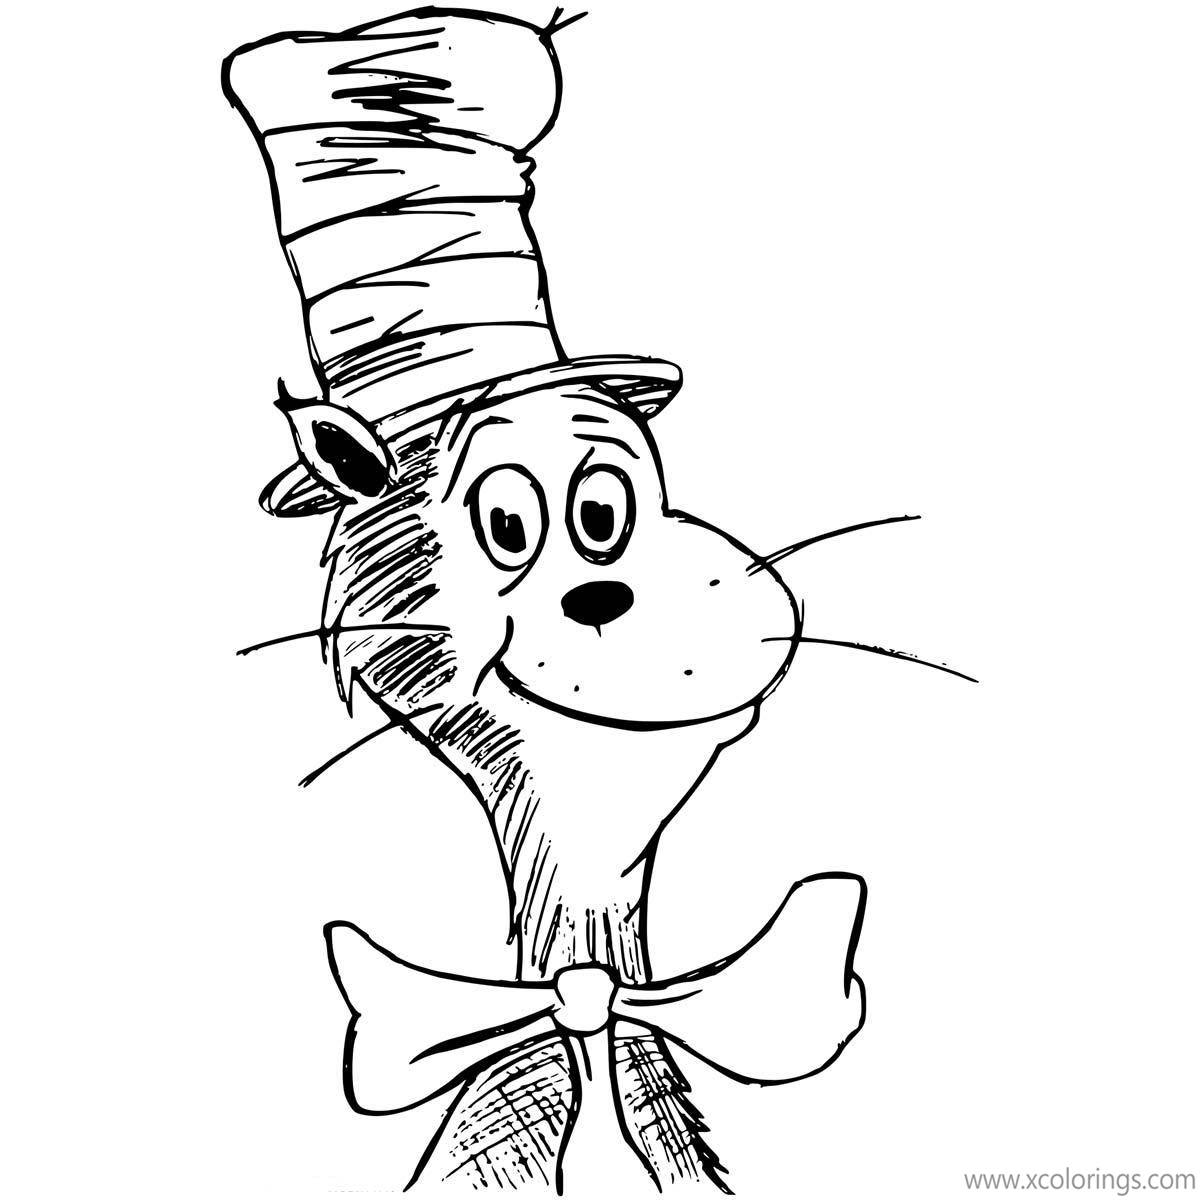 Cat In The Hat Coloring Pages for Preschoolers - XColorings.com